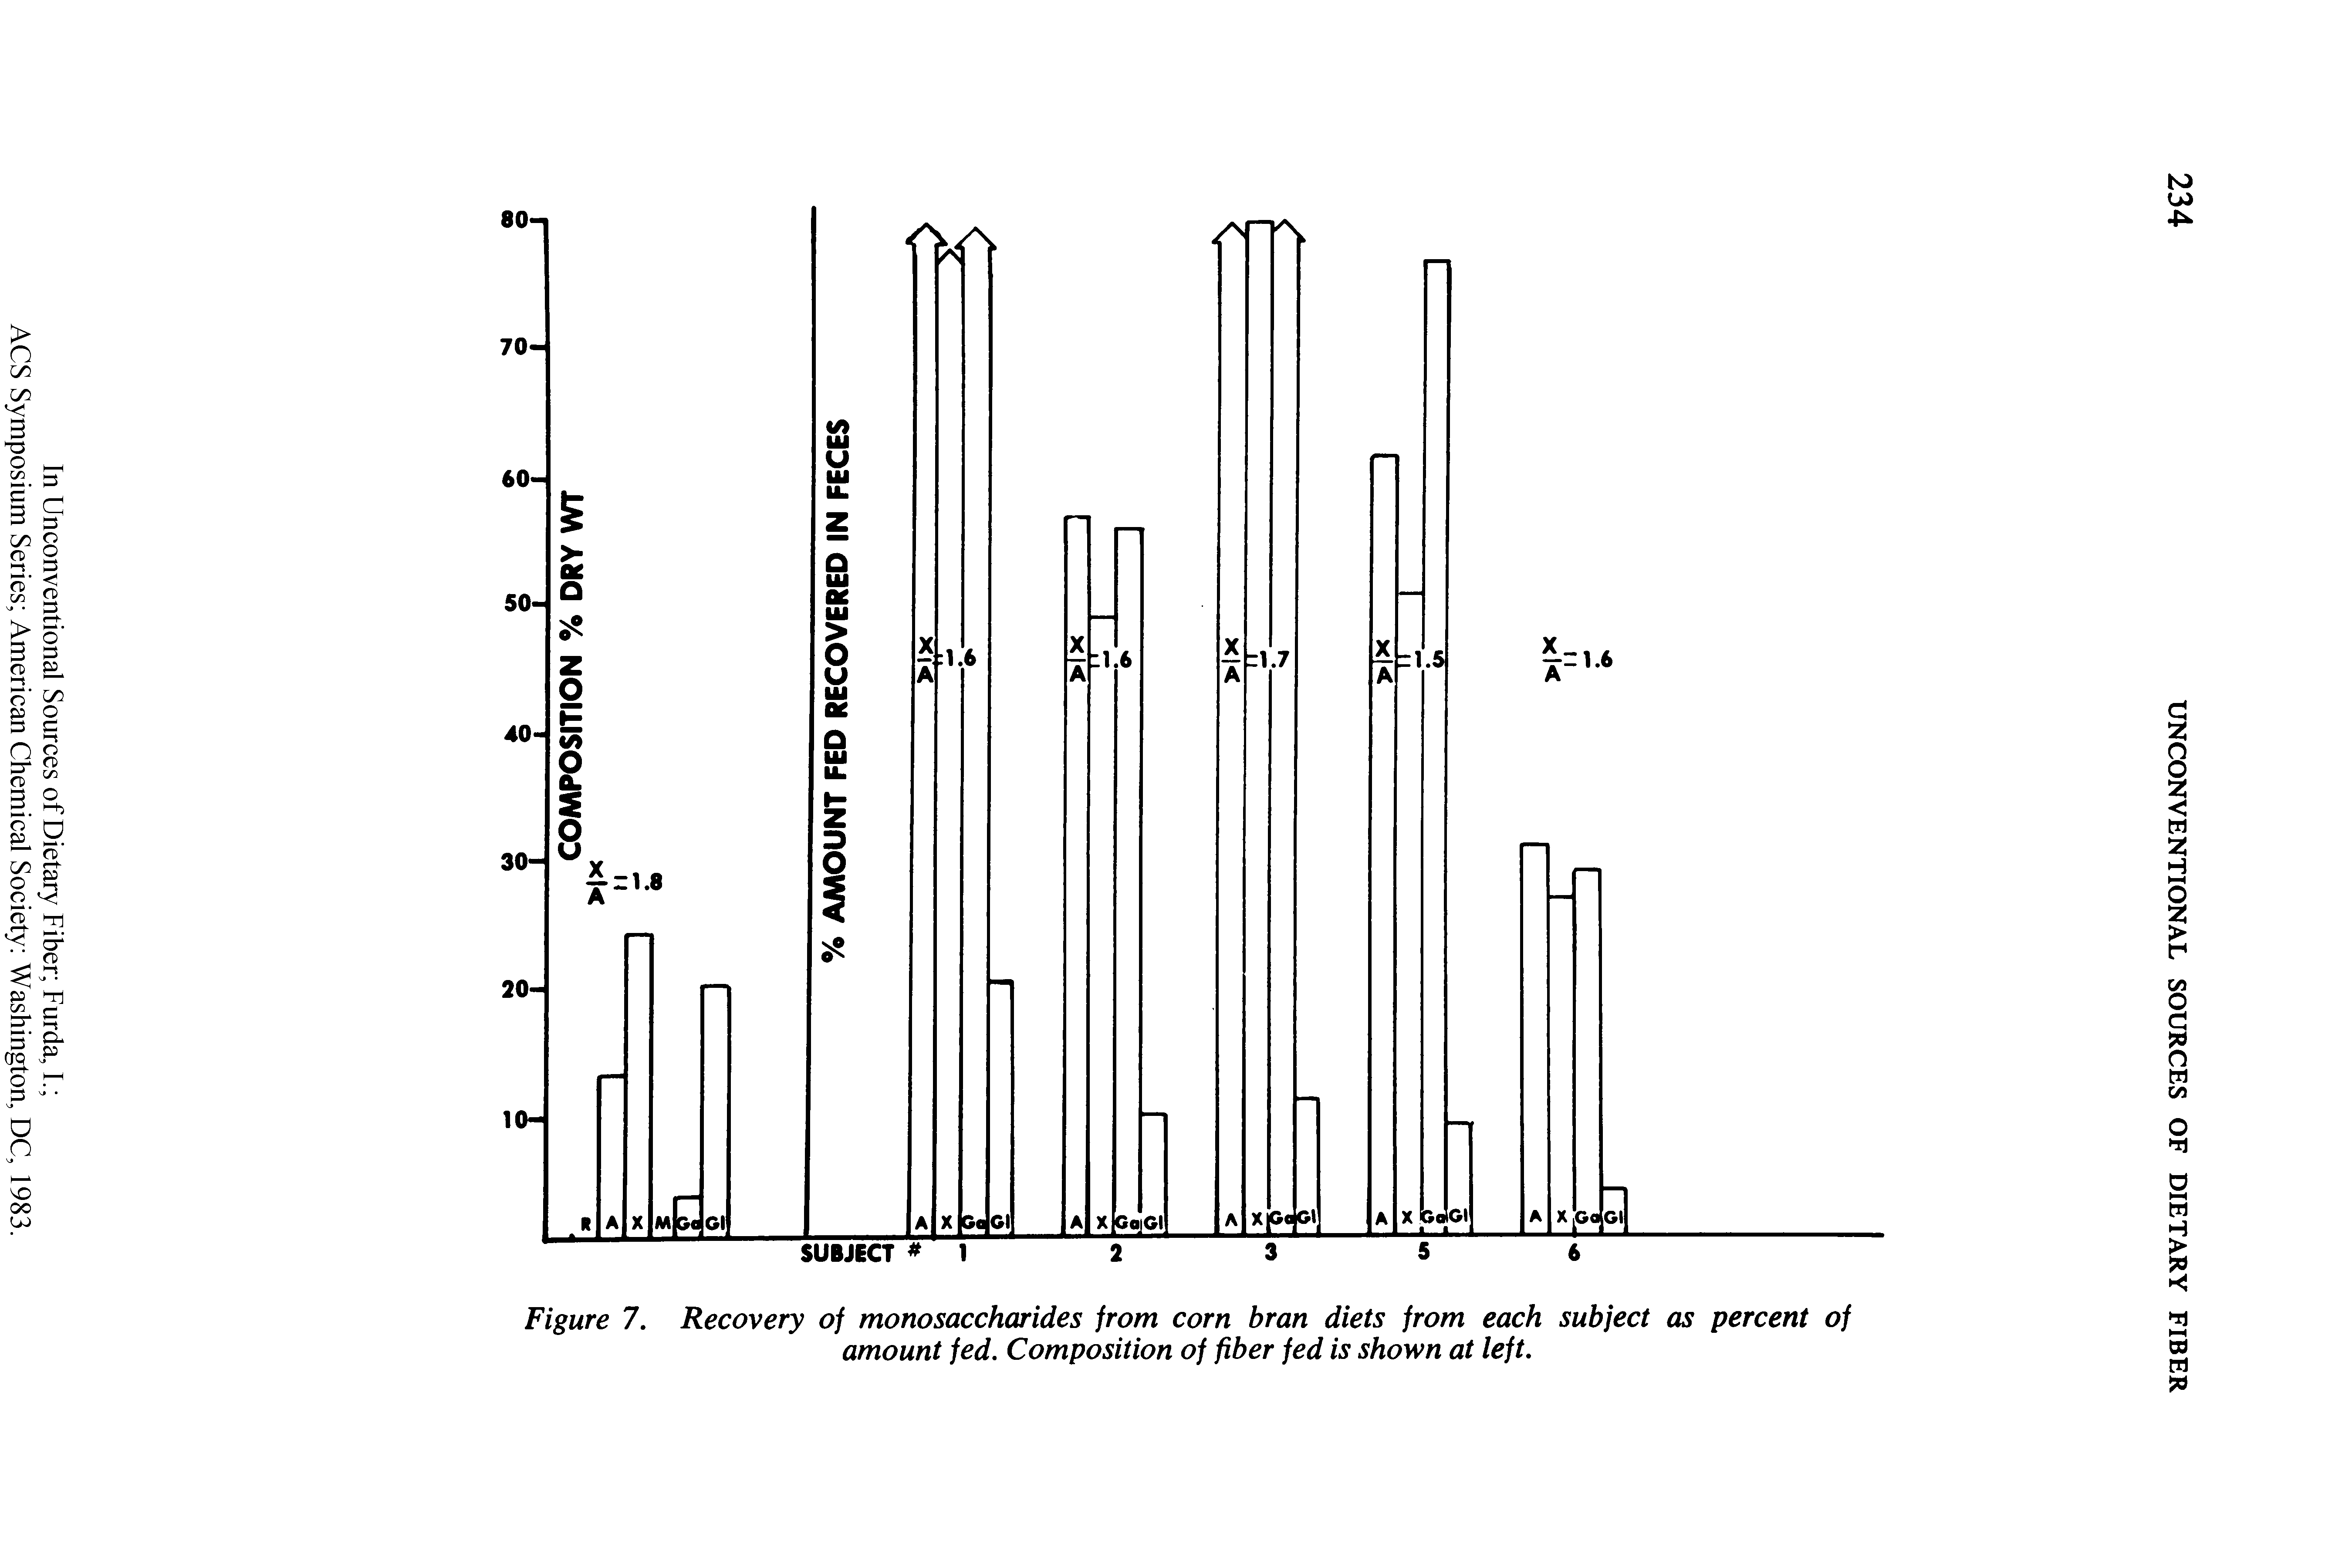 Figure 7. Recovery of monosaccharides from corn bran diets from each subject as percent of amount fed. Composition of fiber fed is shown at left.